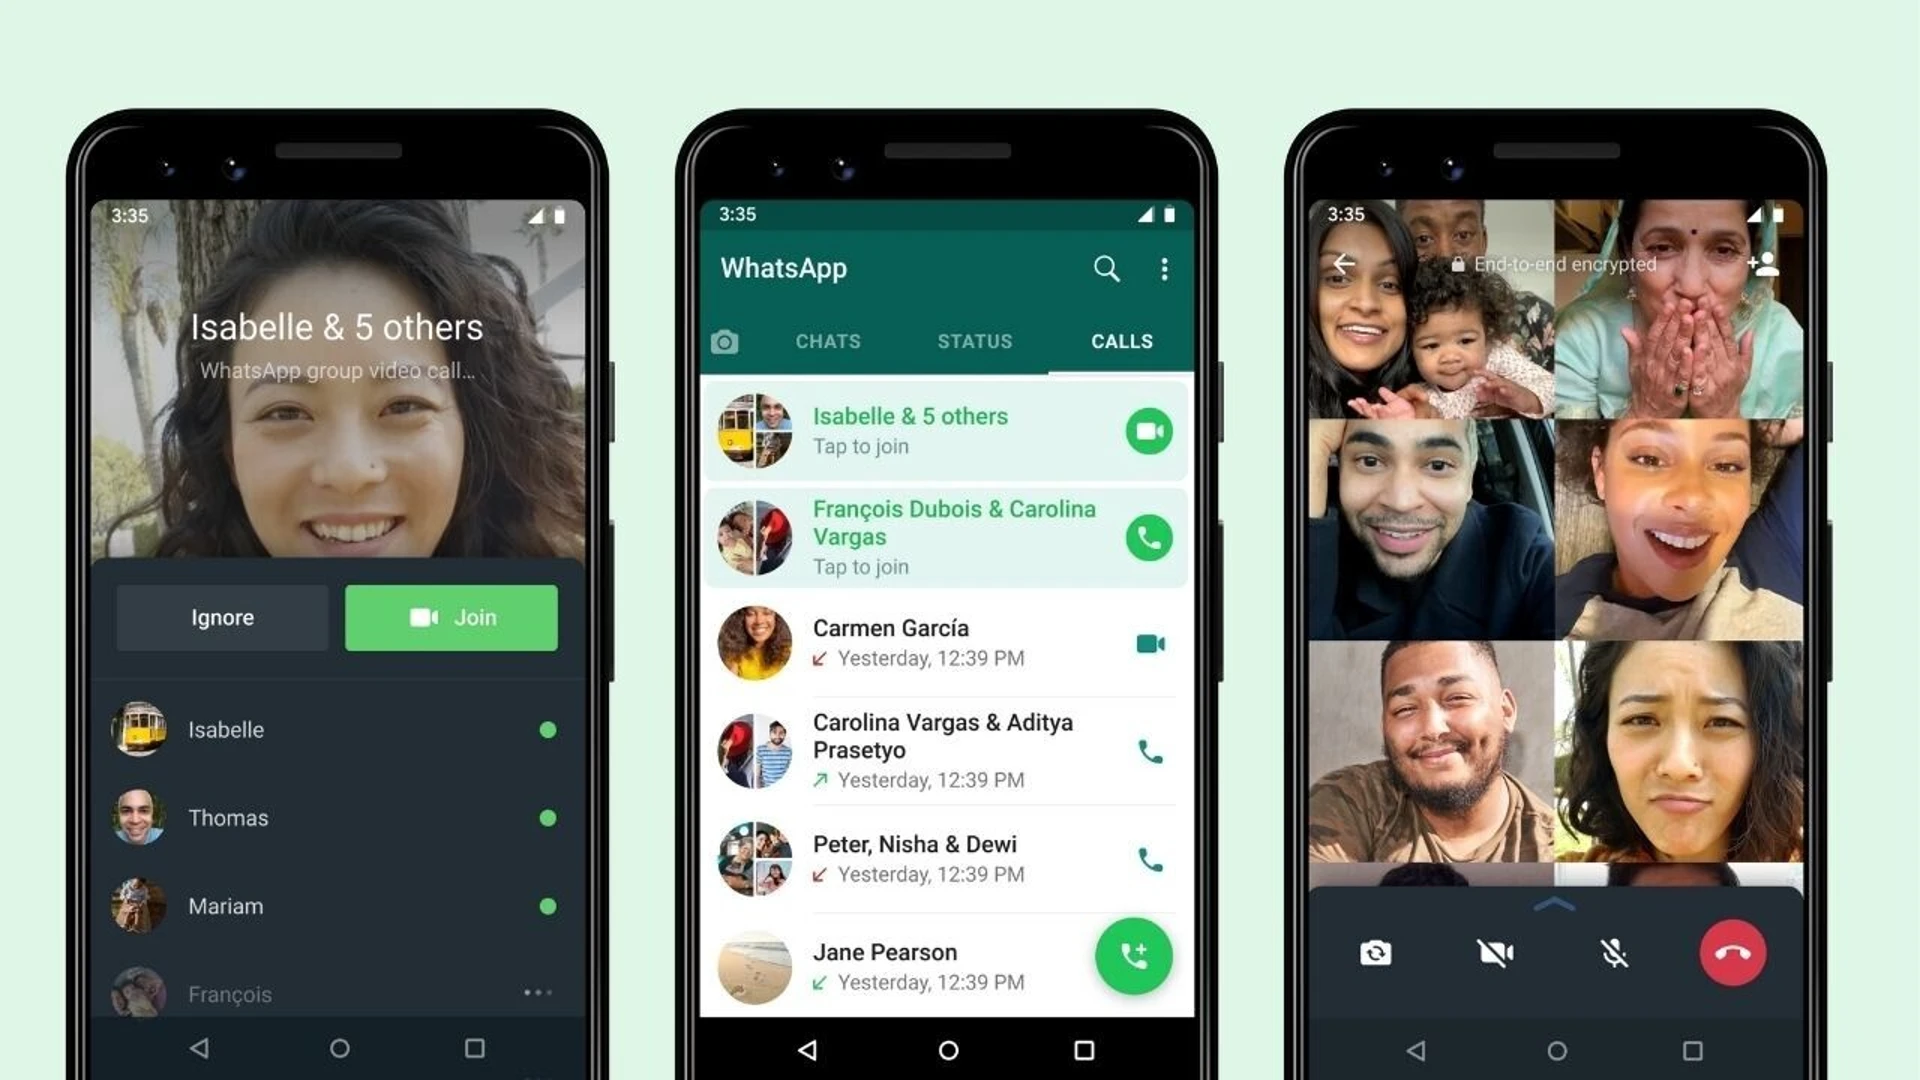 WhatsApp Rolls Out New Voice Call Feature, Now You Can Talk To 32 People At A Time